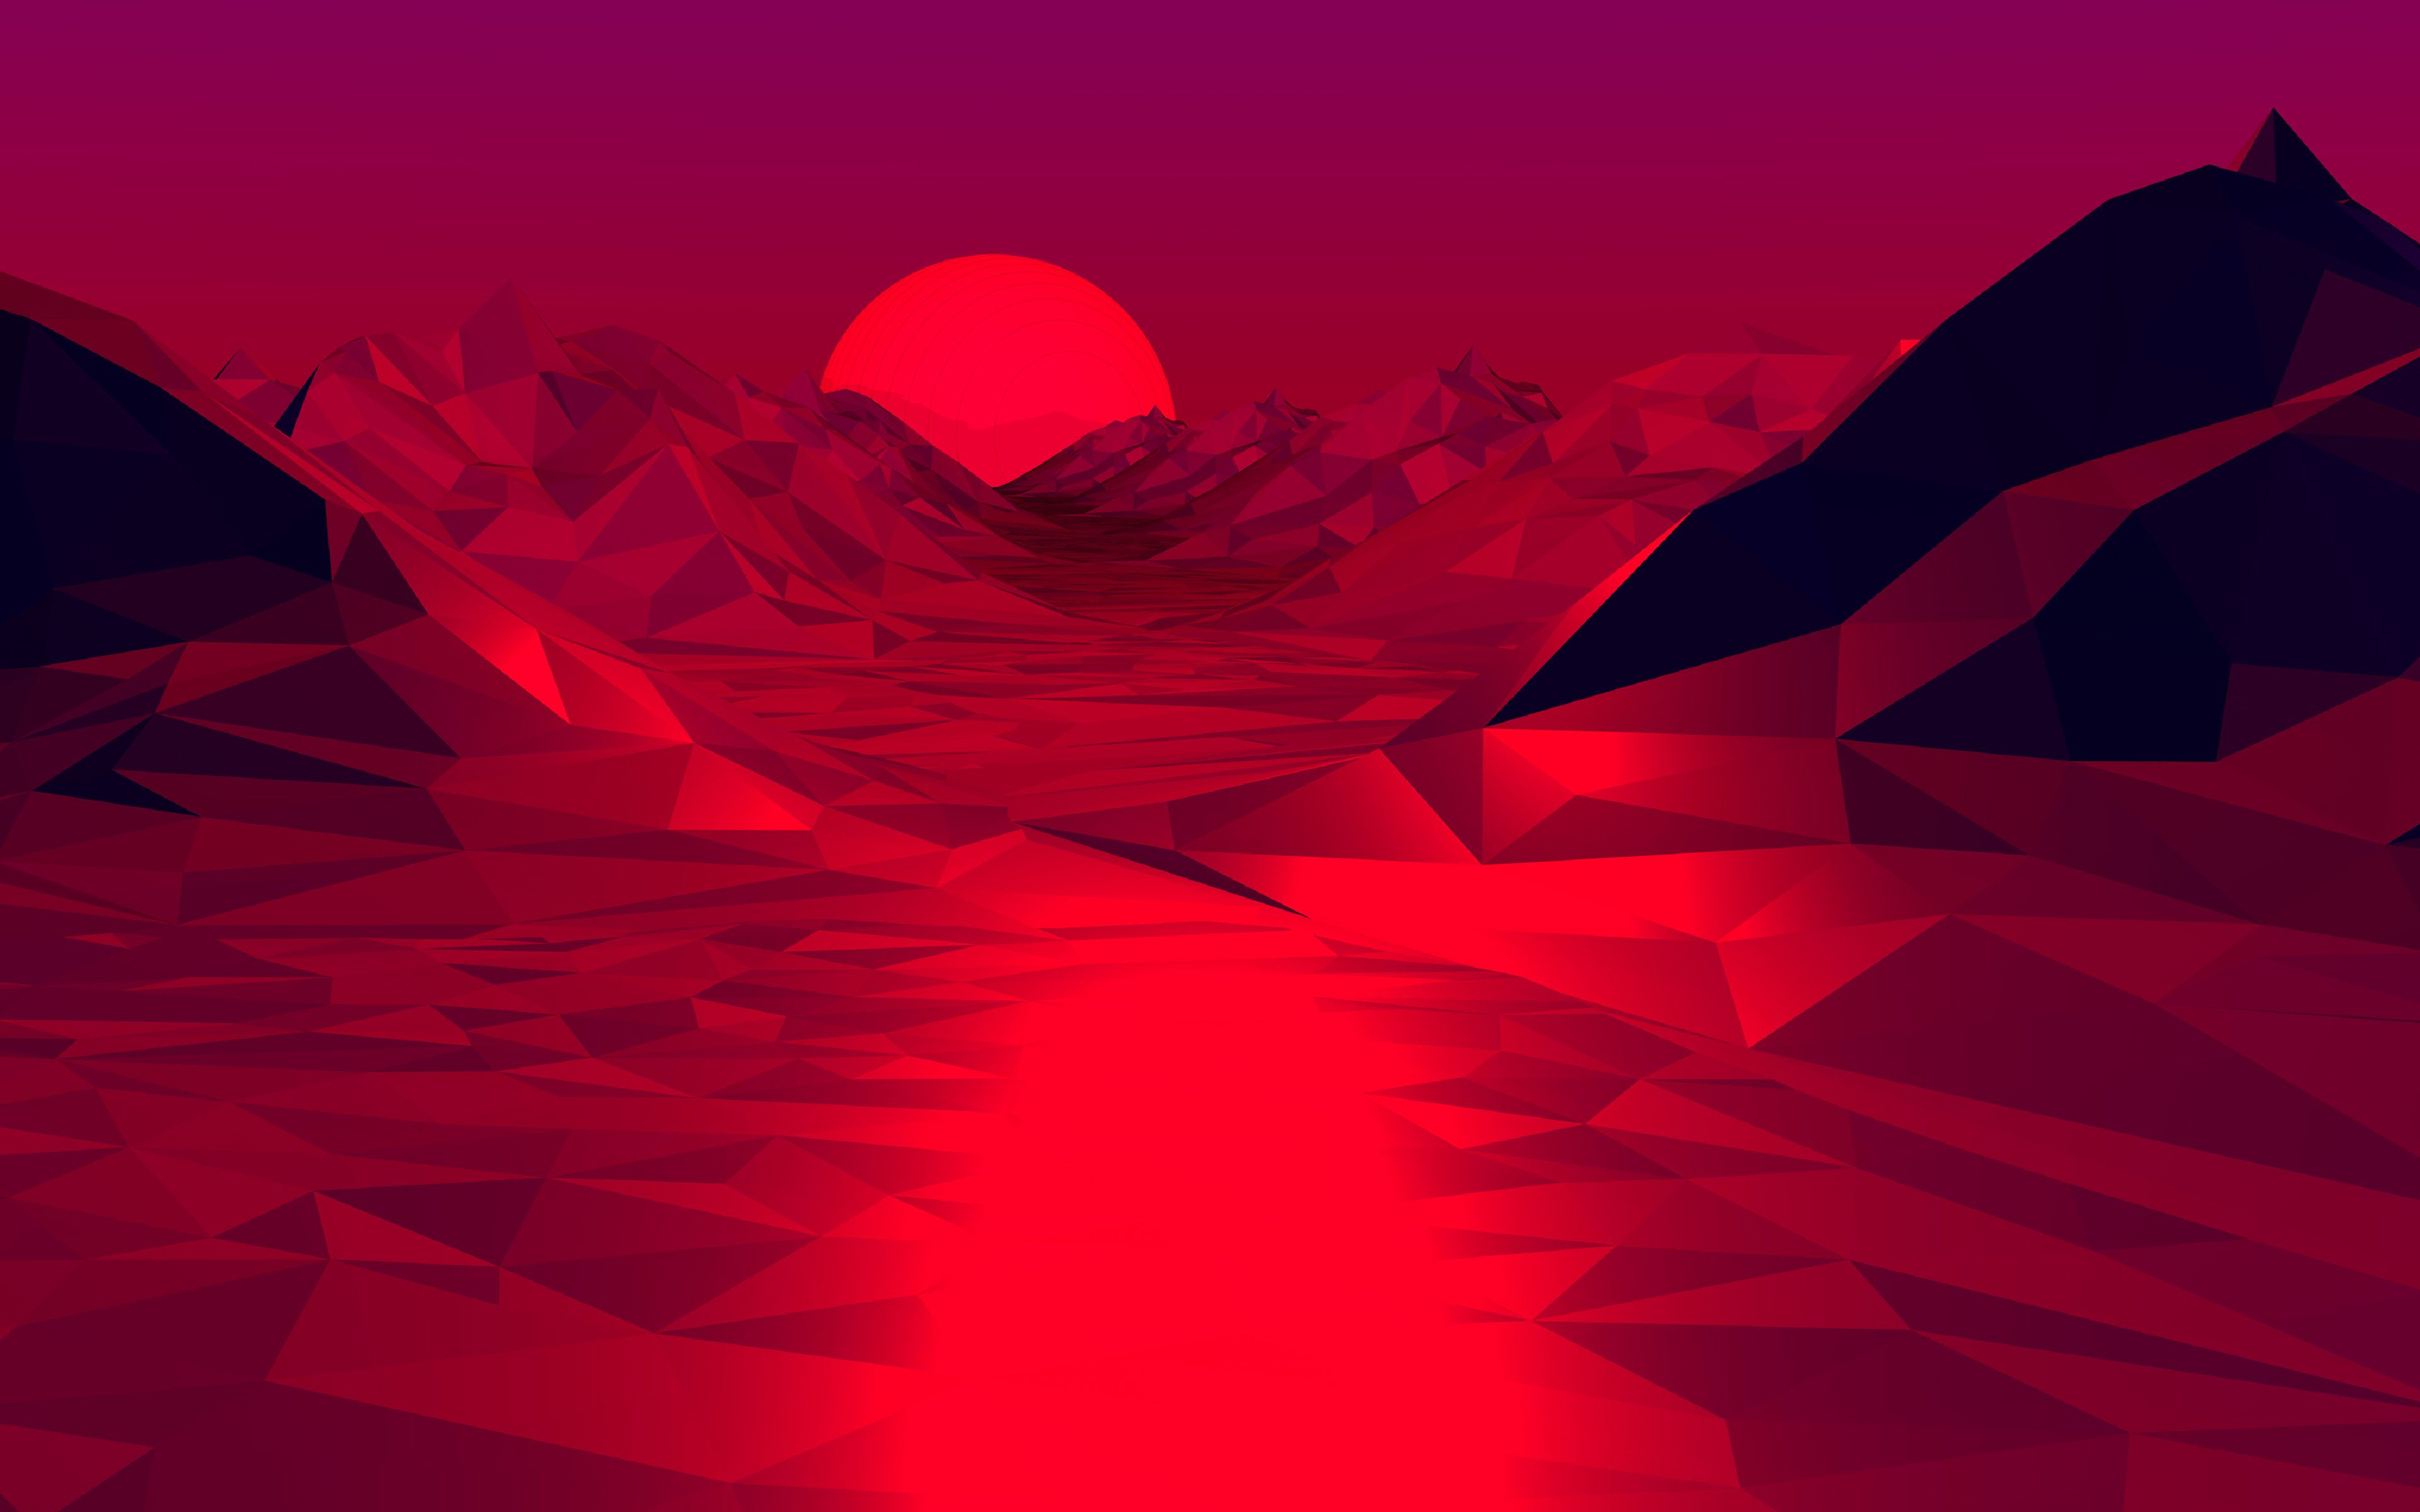 Download wallpaper red abstract landscape, 4k, moon, mountains, desert, low poly landscape, abstract nature, low poly art, abstract 3D landscape for desktop with resolution 3840x2400. High Quality HD picture wallpaper